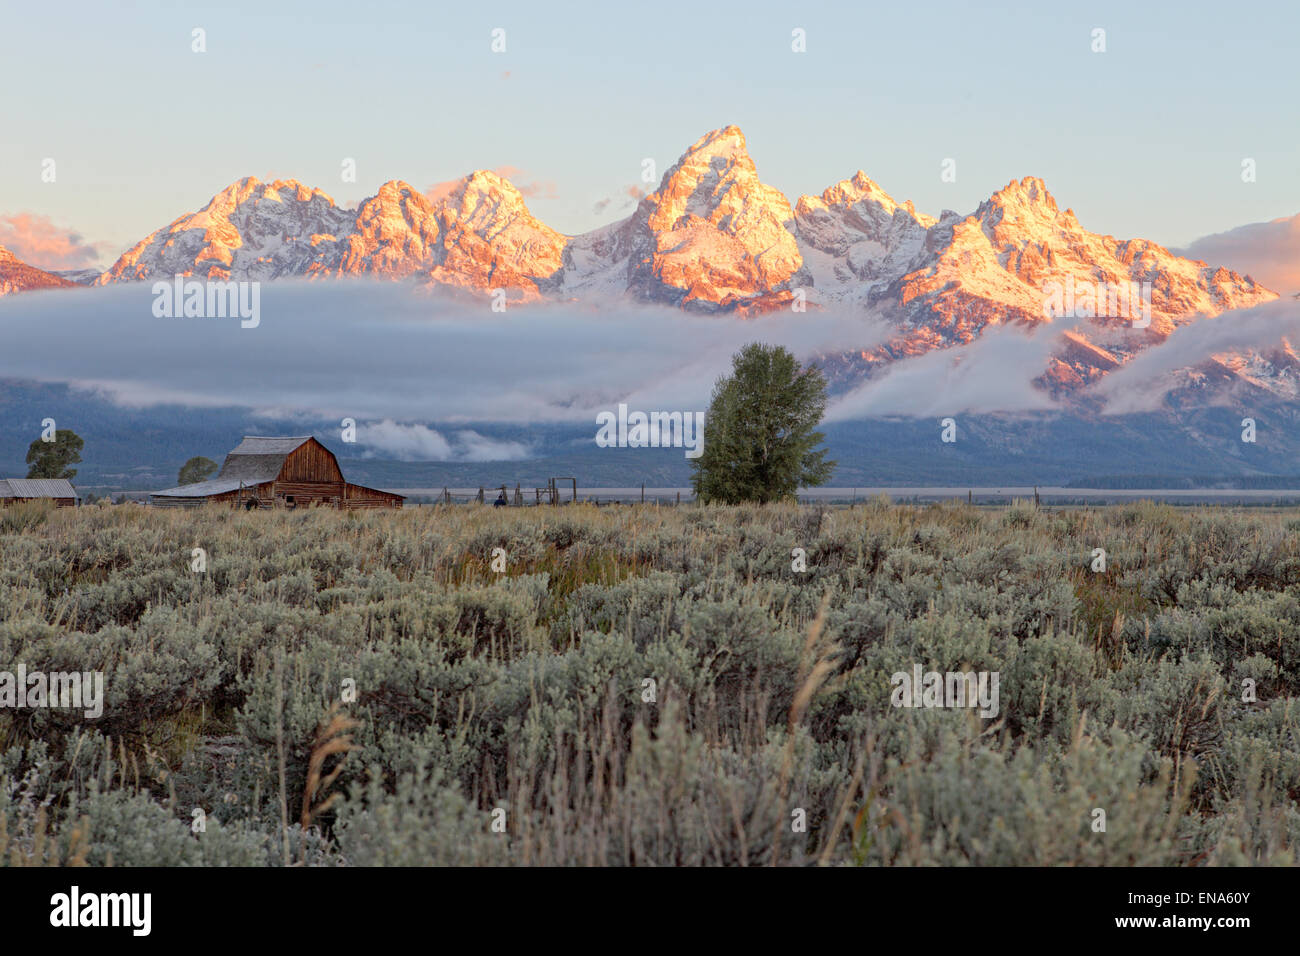 A sunrise view of the Teton mountain range, with the famous Moulton barn in the foreground. Stock Photo